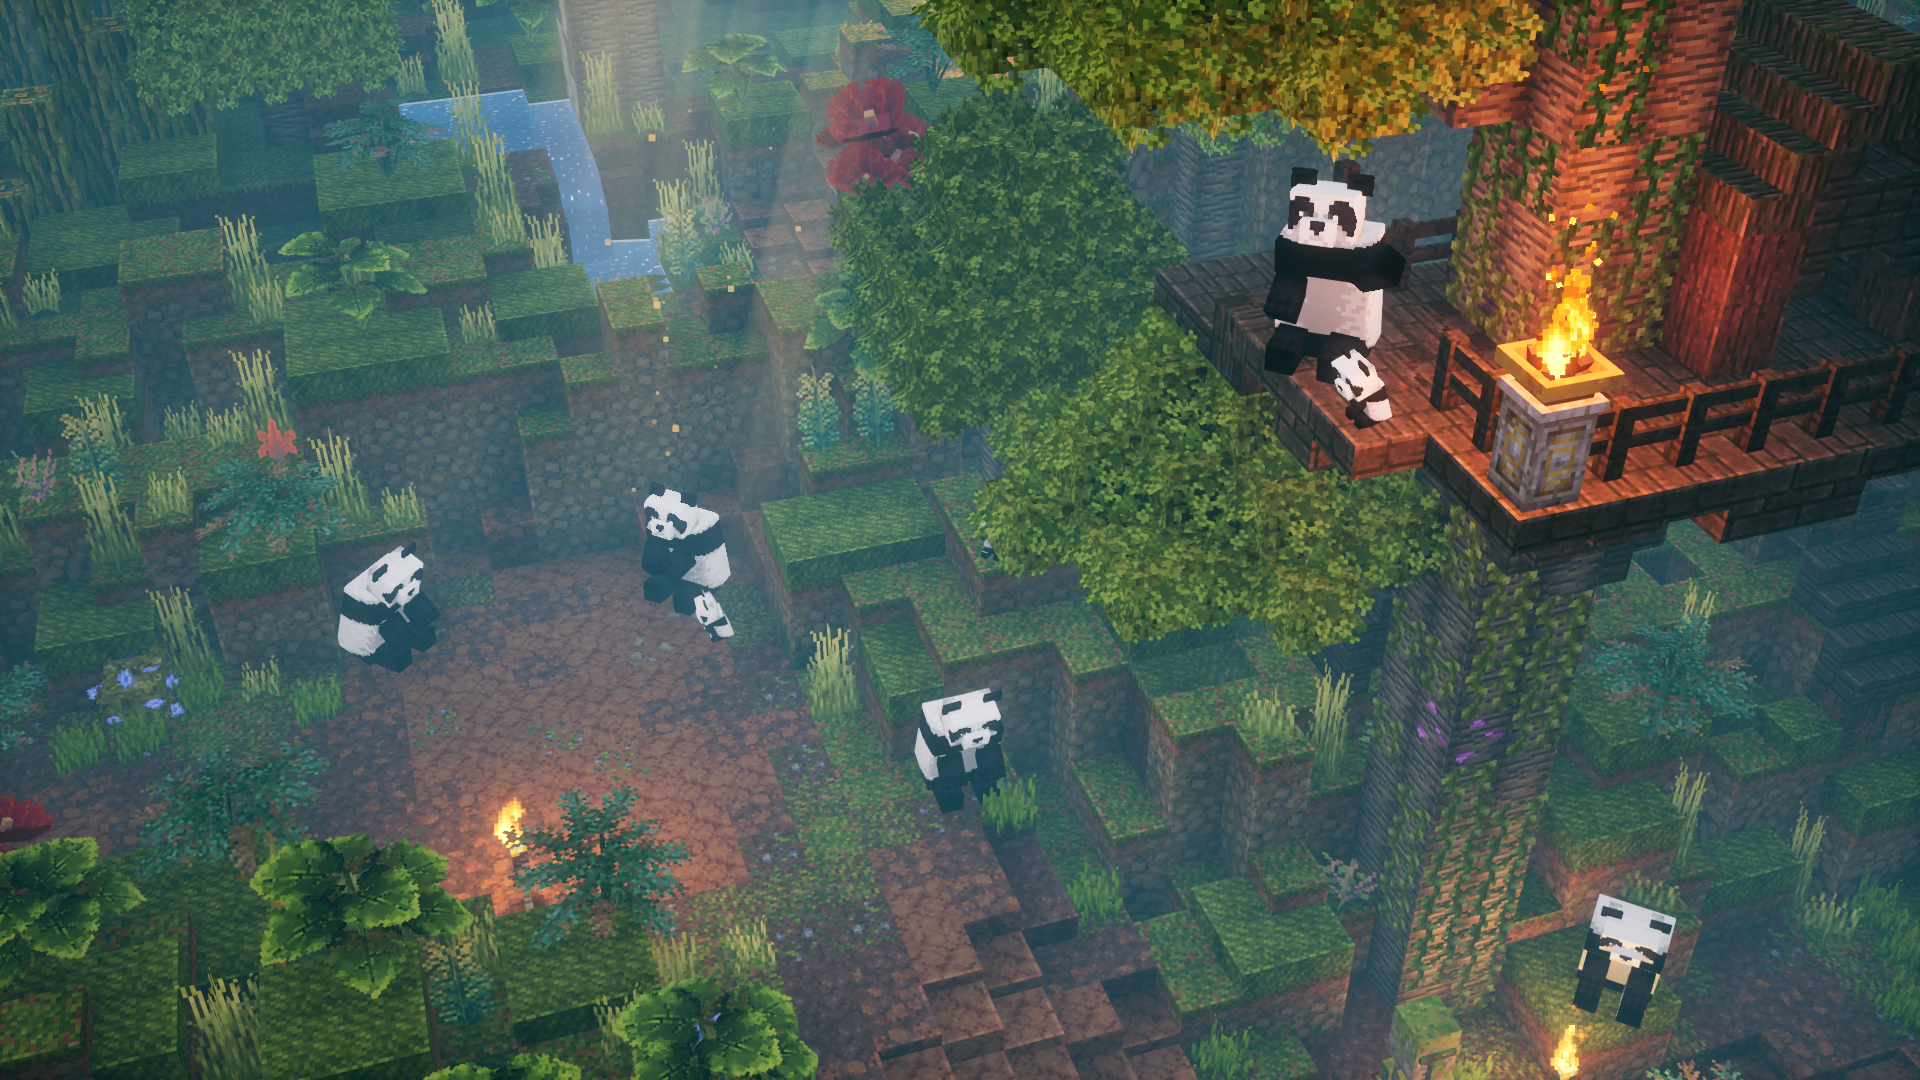 Pandas and more now in Minecraft Bedrock